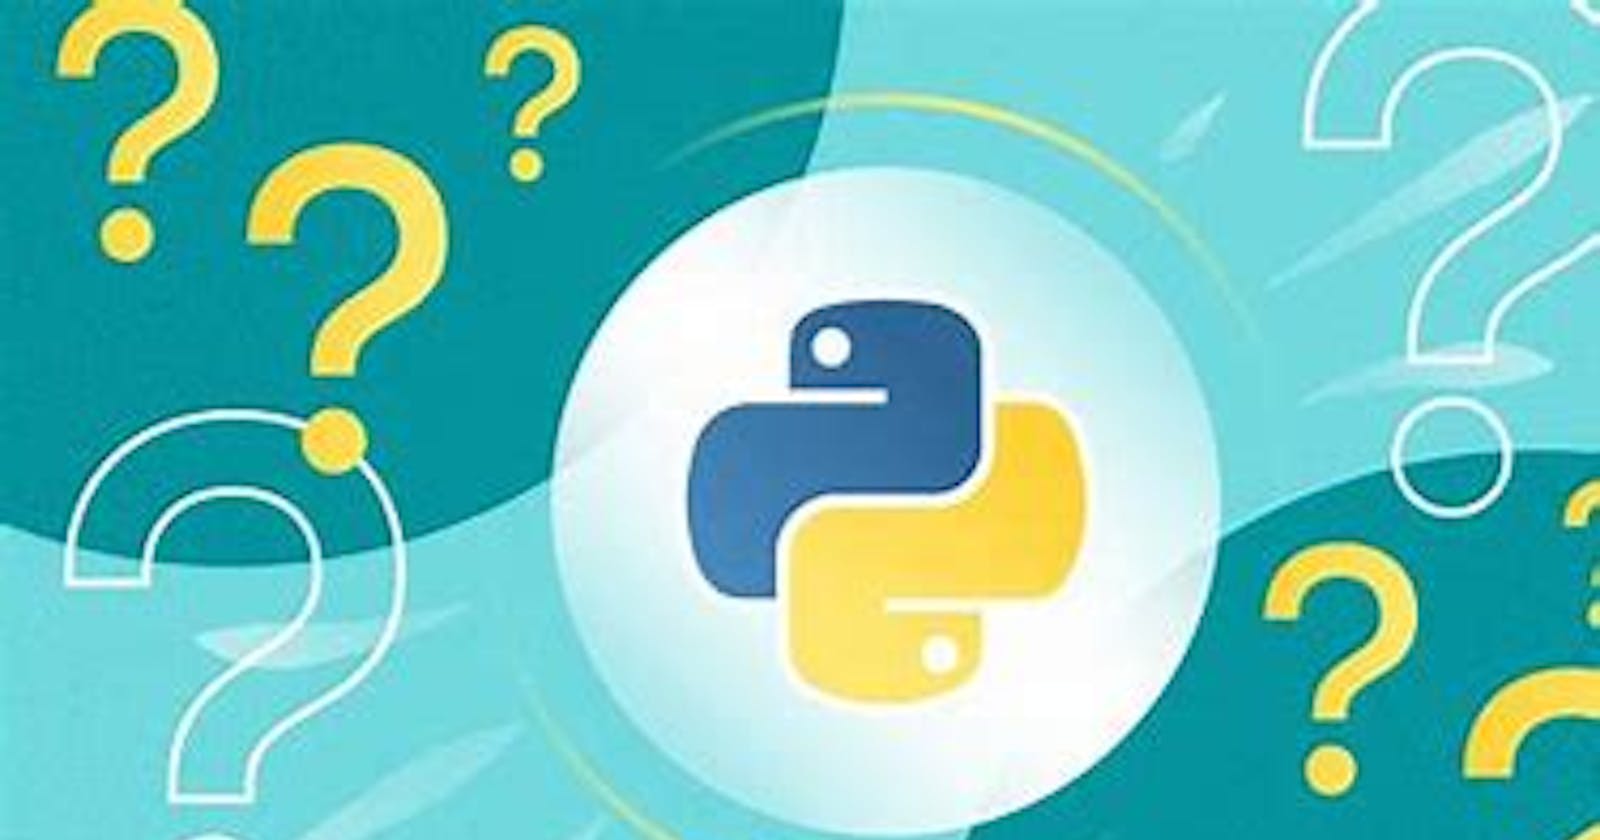 1- Introduction to Python